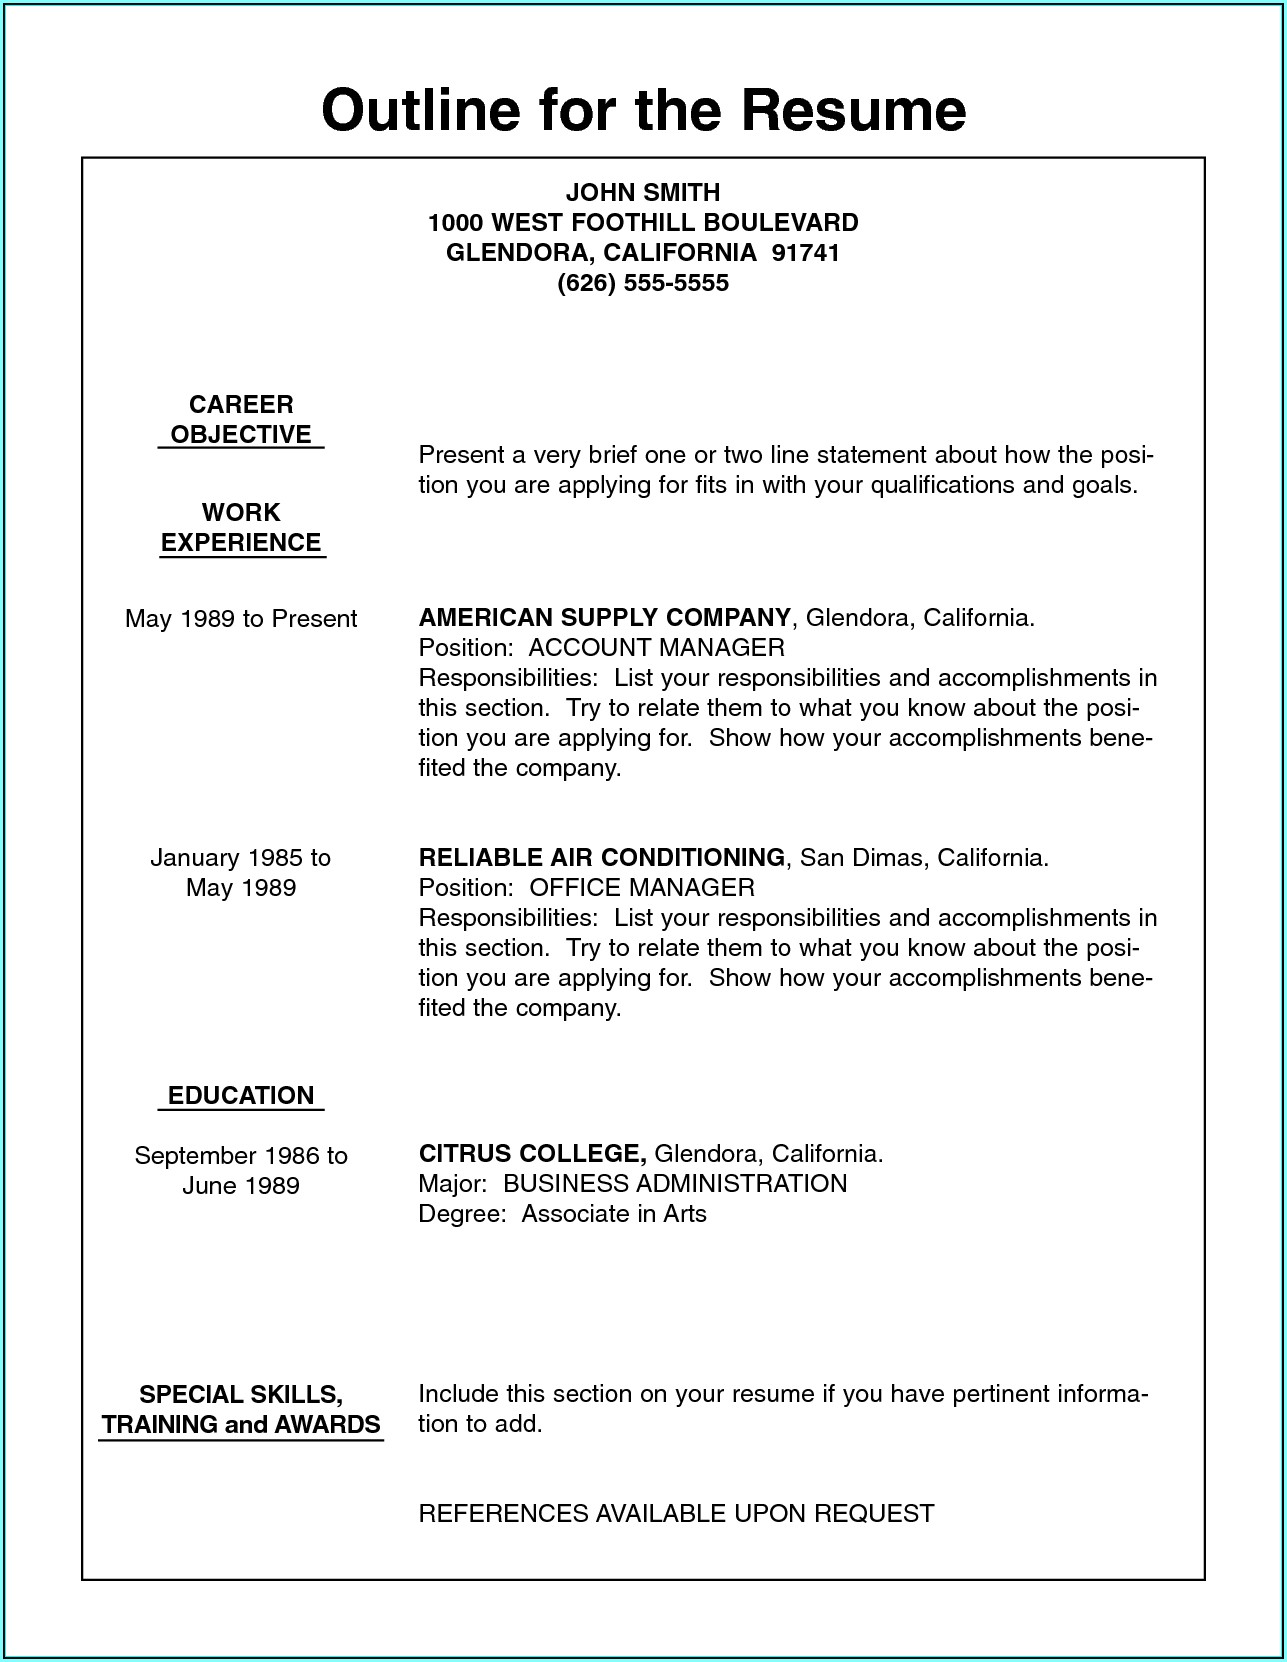 Outlines For Resumes Examples